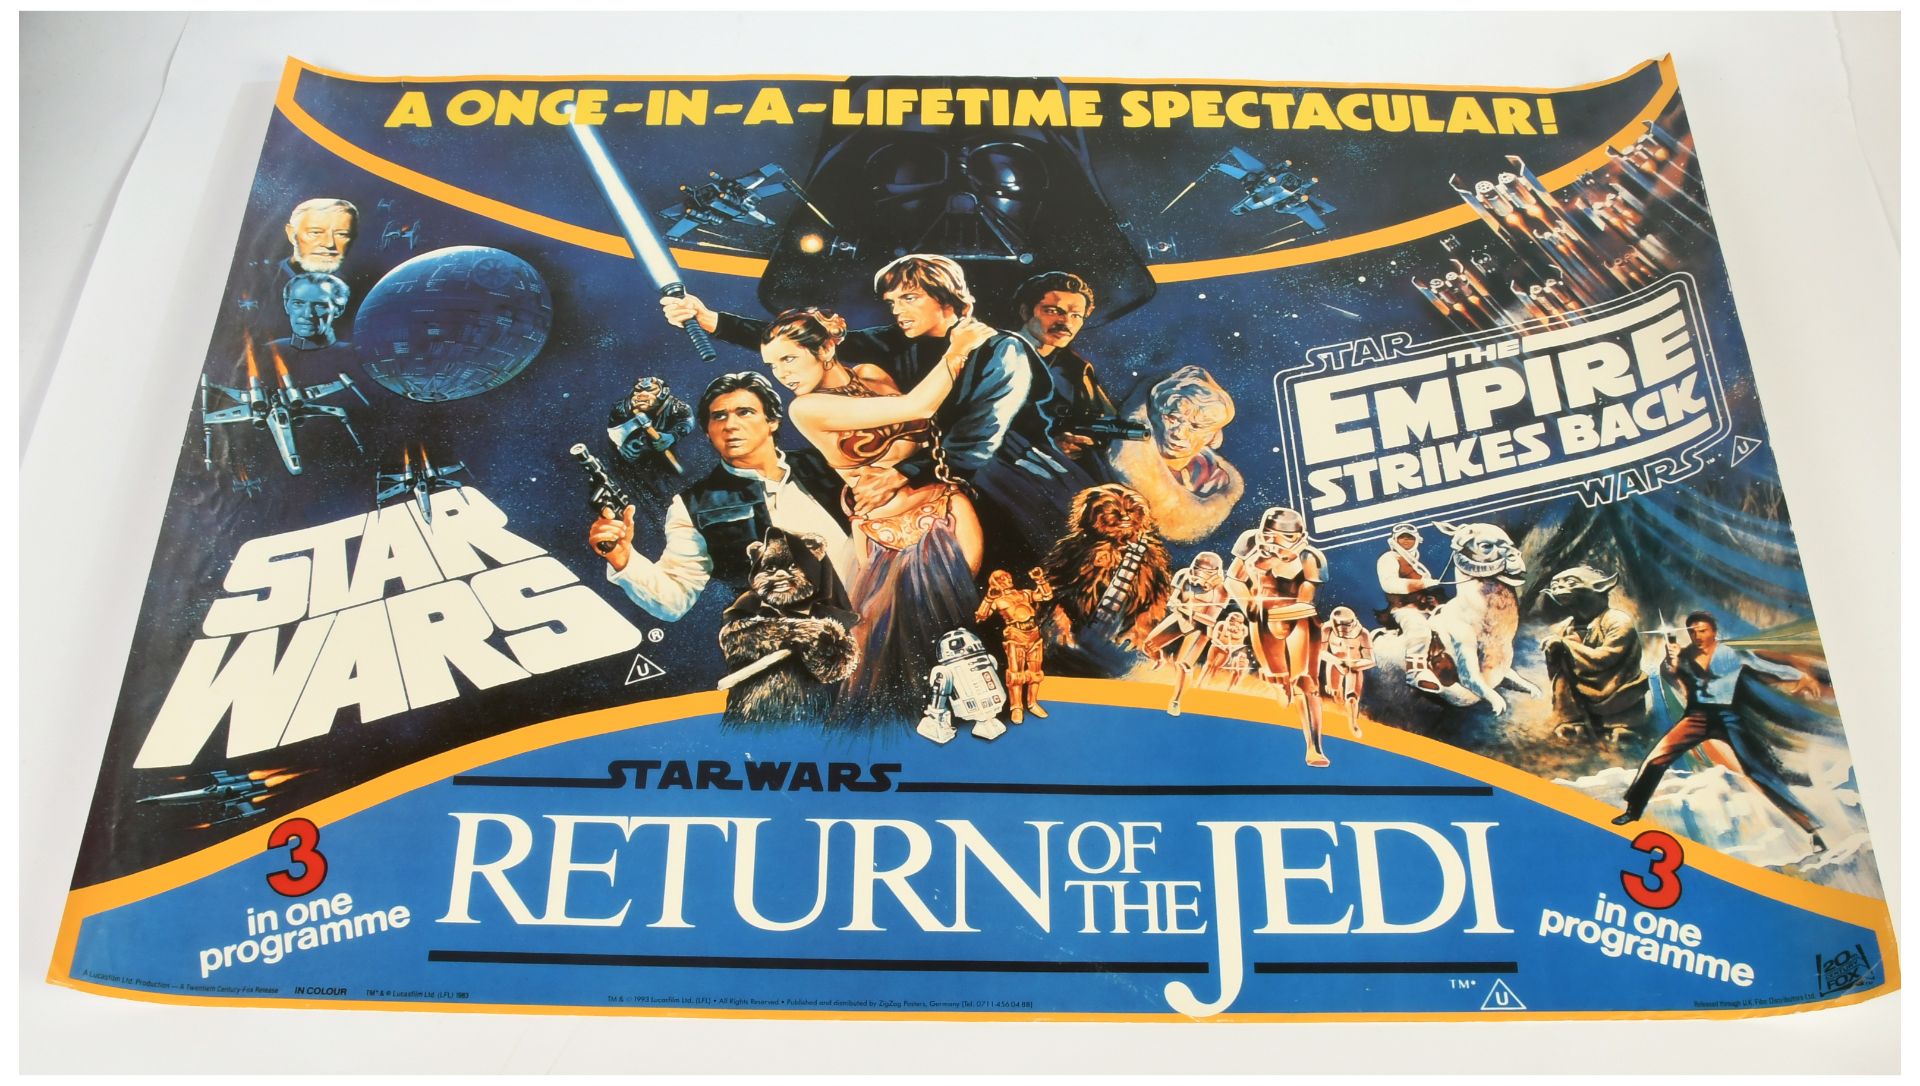 Star Wars Once-in-a-Lifetime Spectacular 3 in one programme German Zig Zag (1993) Film Poster